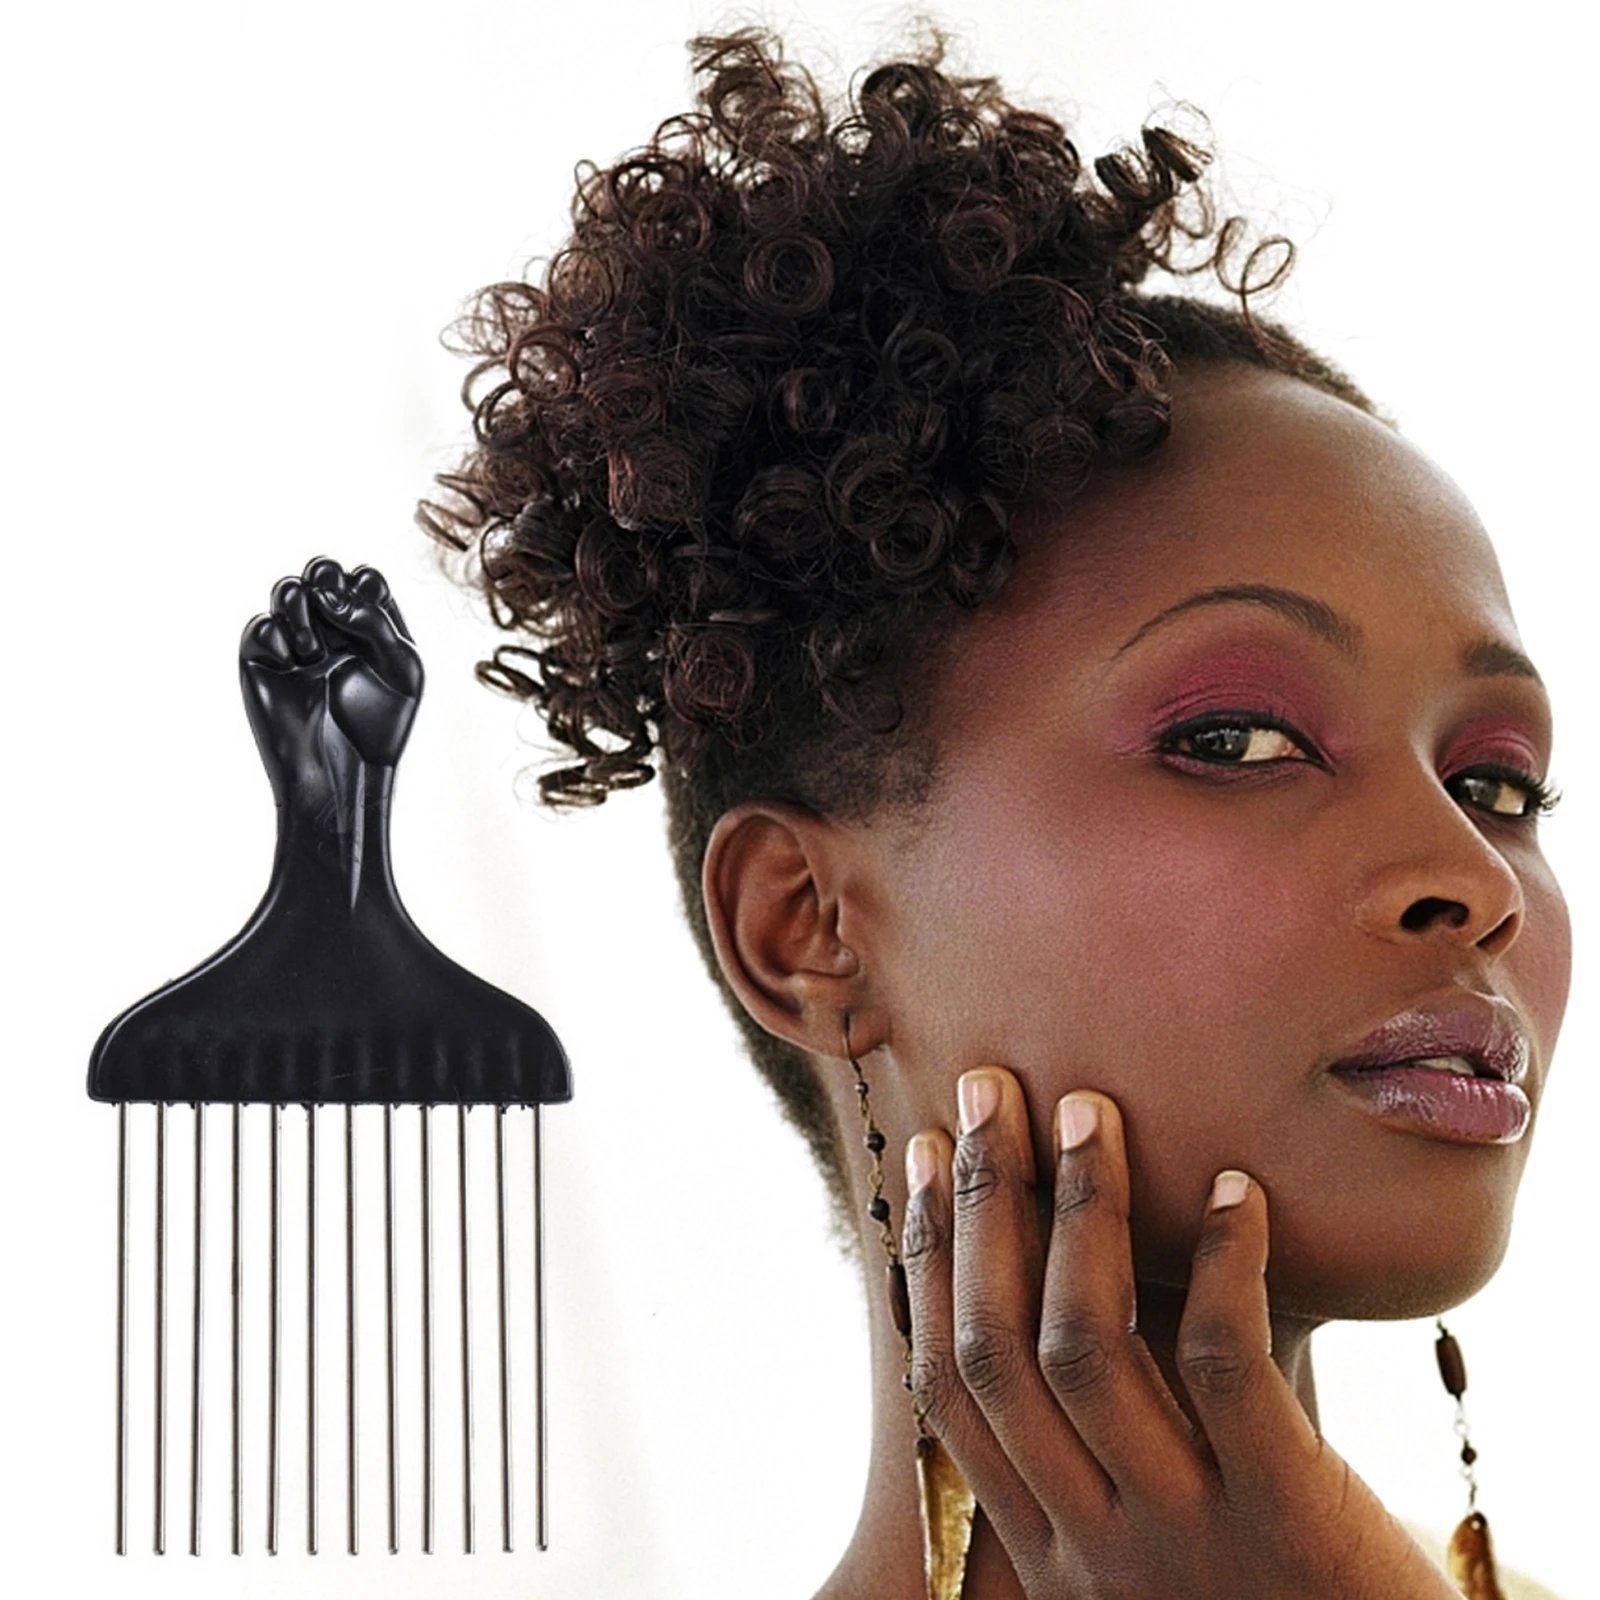 

Wide Teeth Metal Afro Comb Insert Curly Hairbrush Hair Fork Pick Comb Fist Shape Black Handle Hairdressing Brush Styling Tool